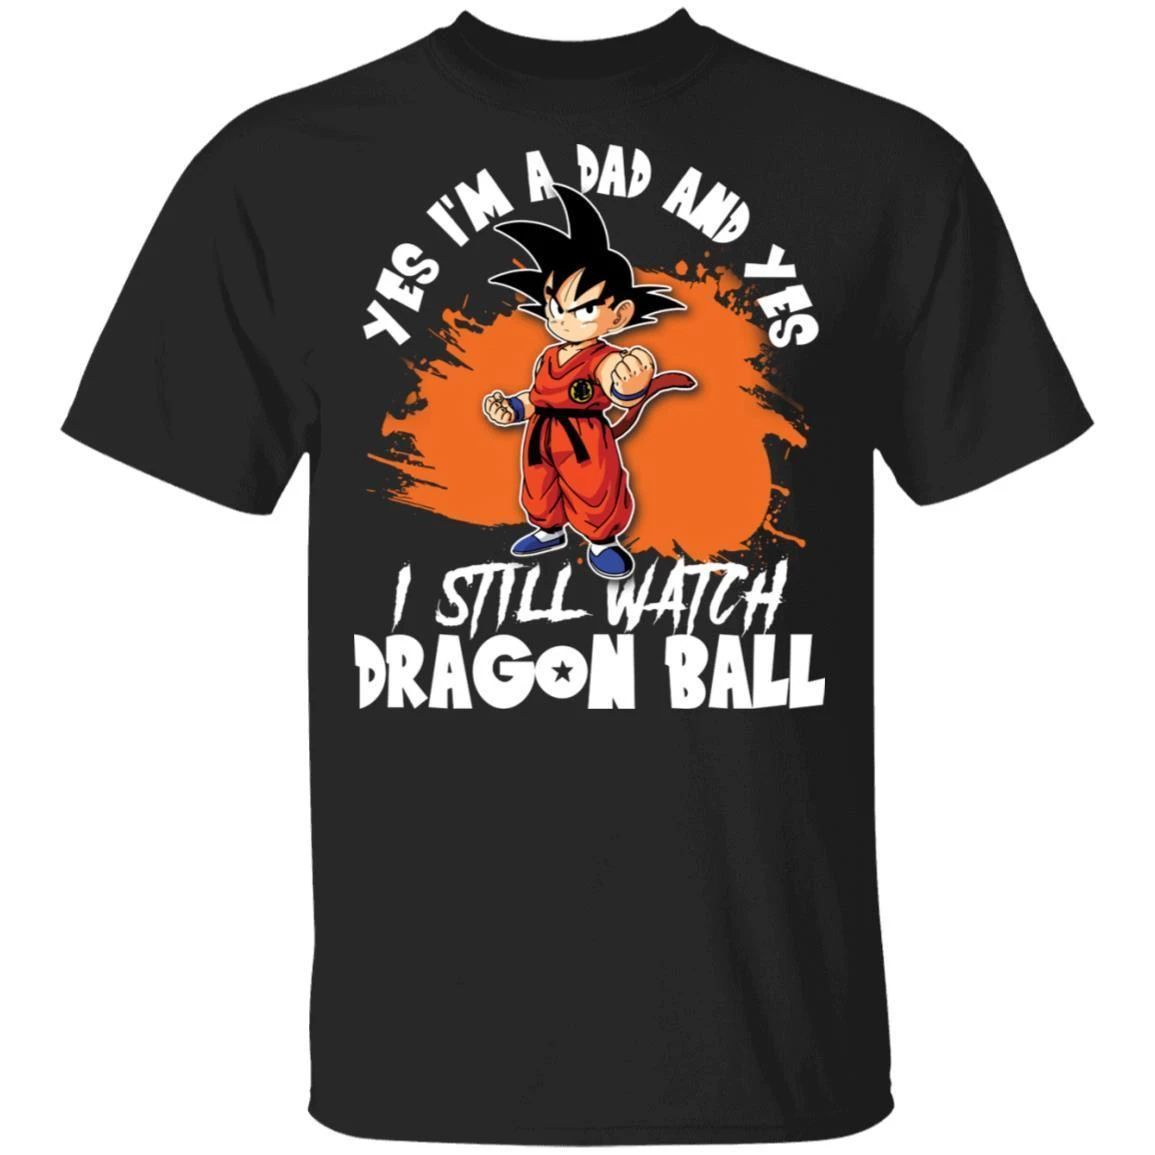 Yes I’m A Dad And Yes I Still Watch Dragon Ball Shirt Son Goku Tee